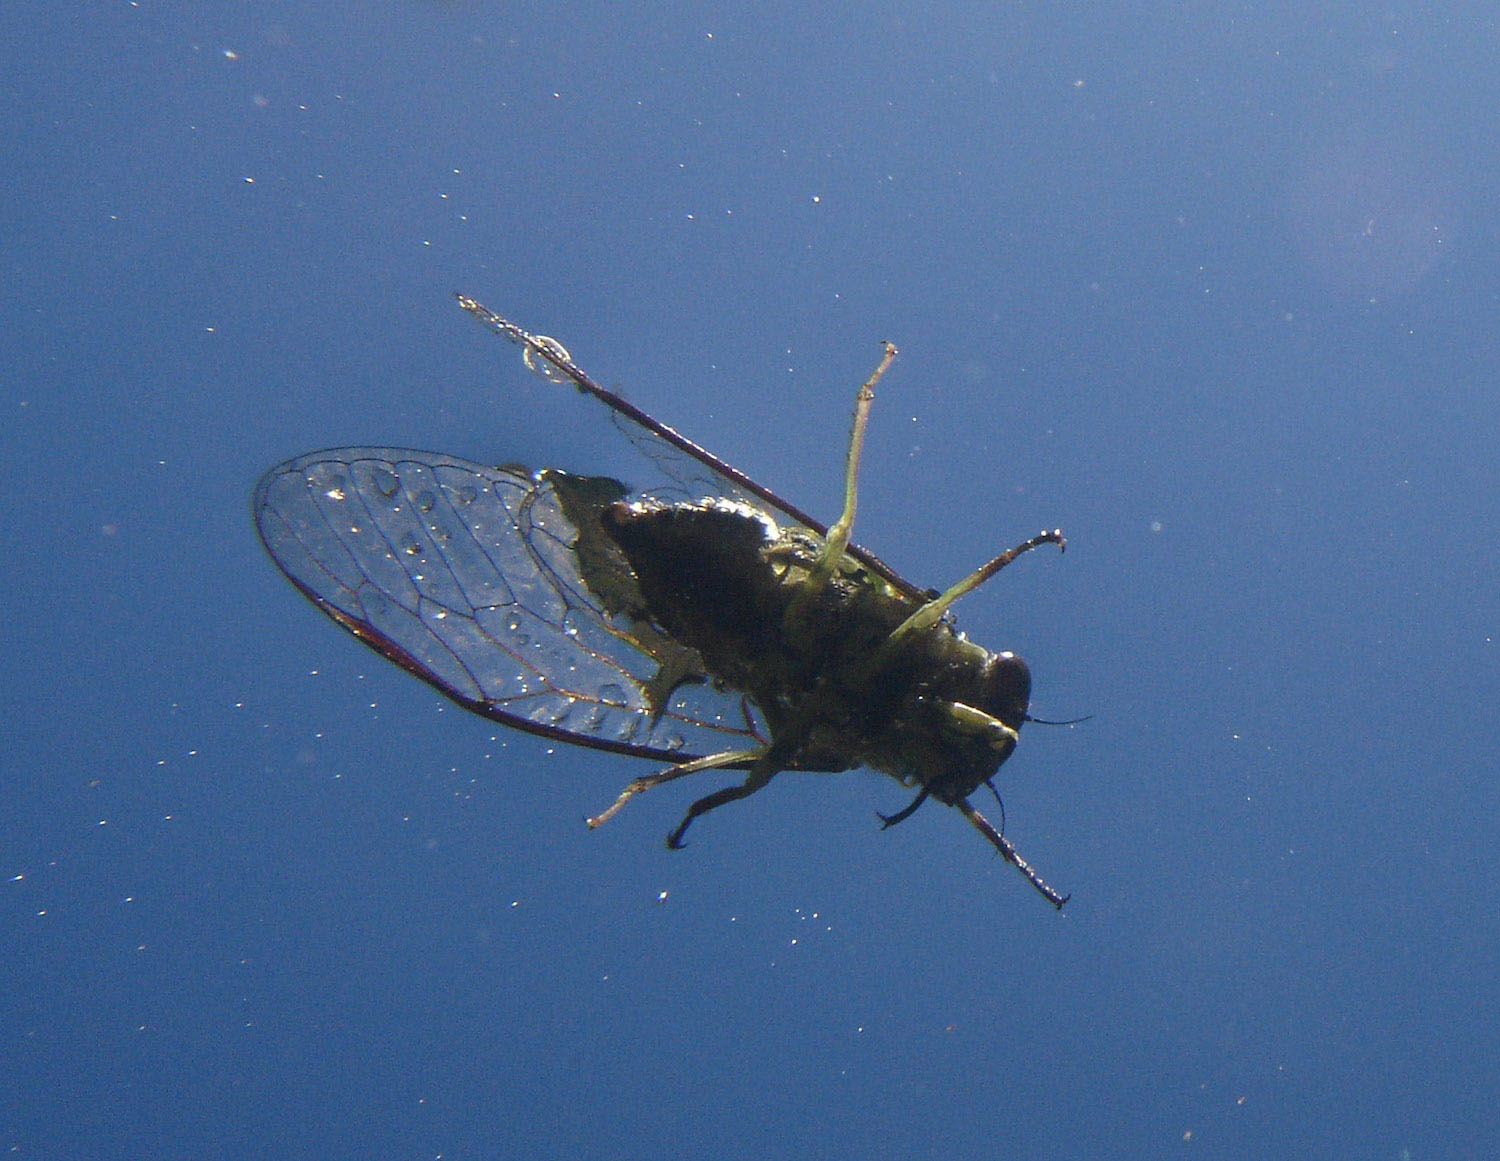 Greater Bronze Cidada on water, photographed from below, clear blu sky above